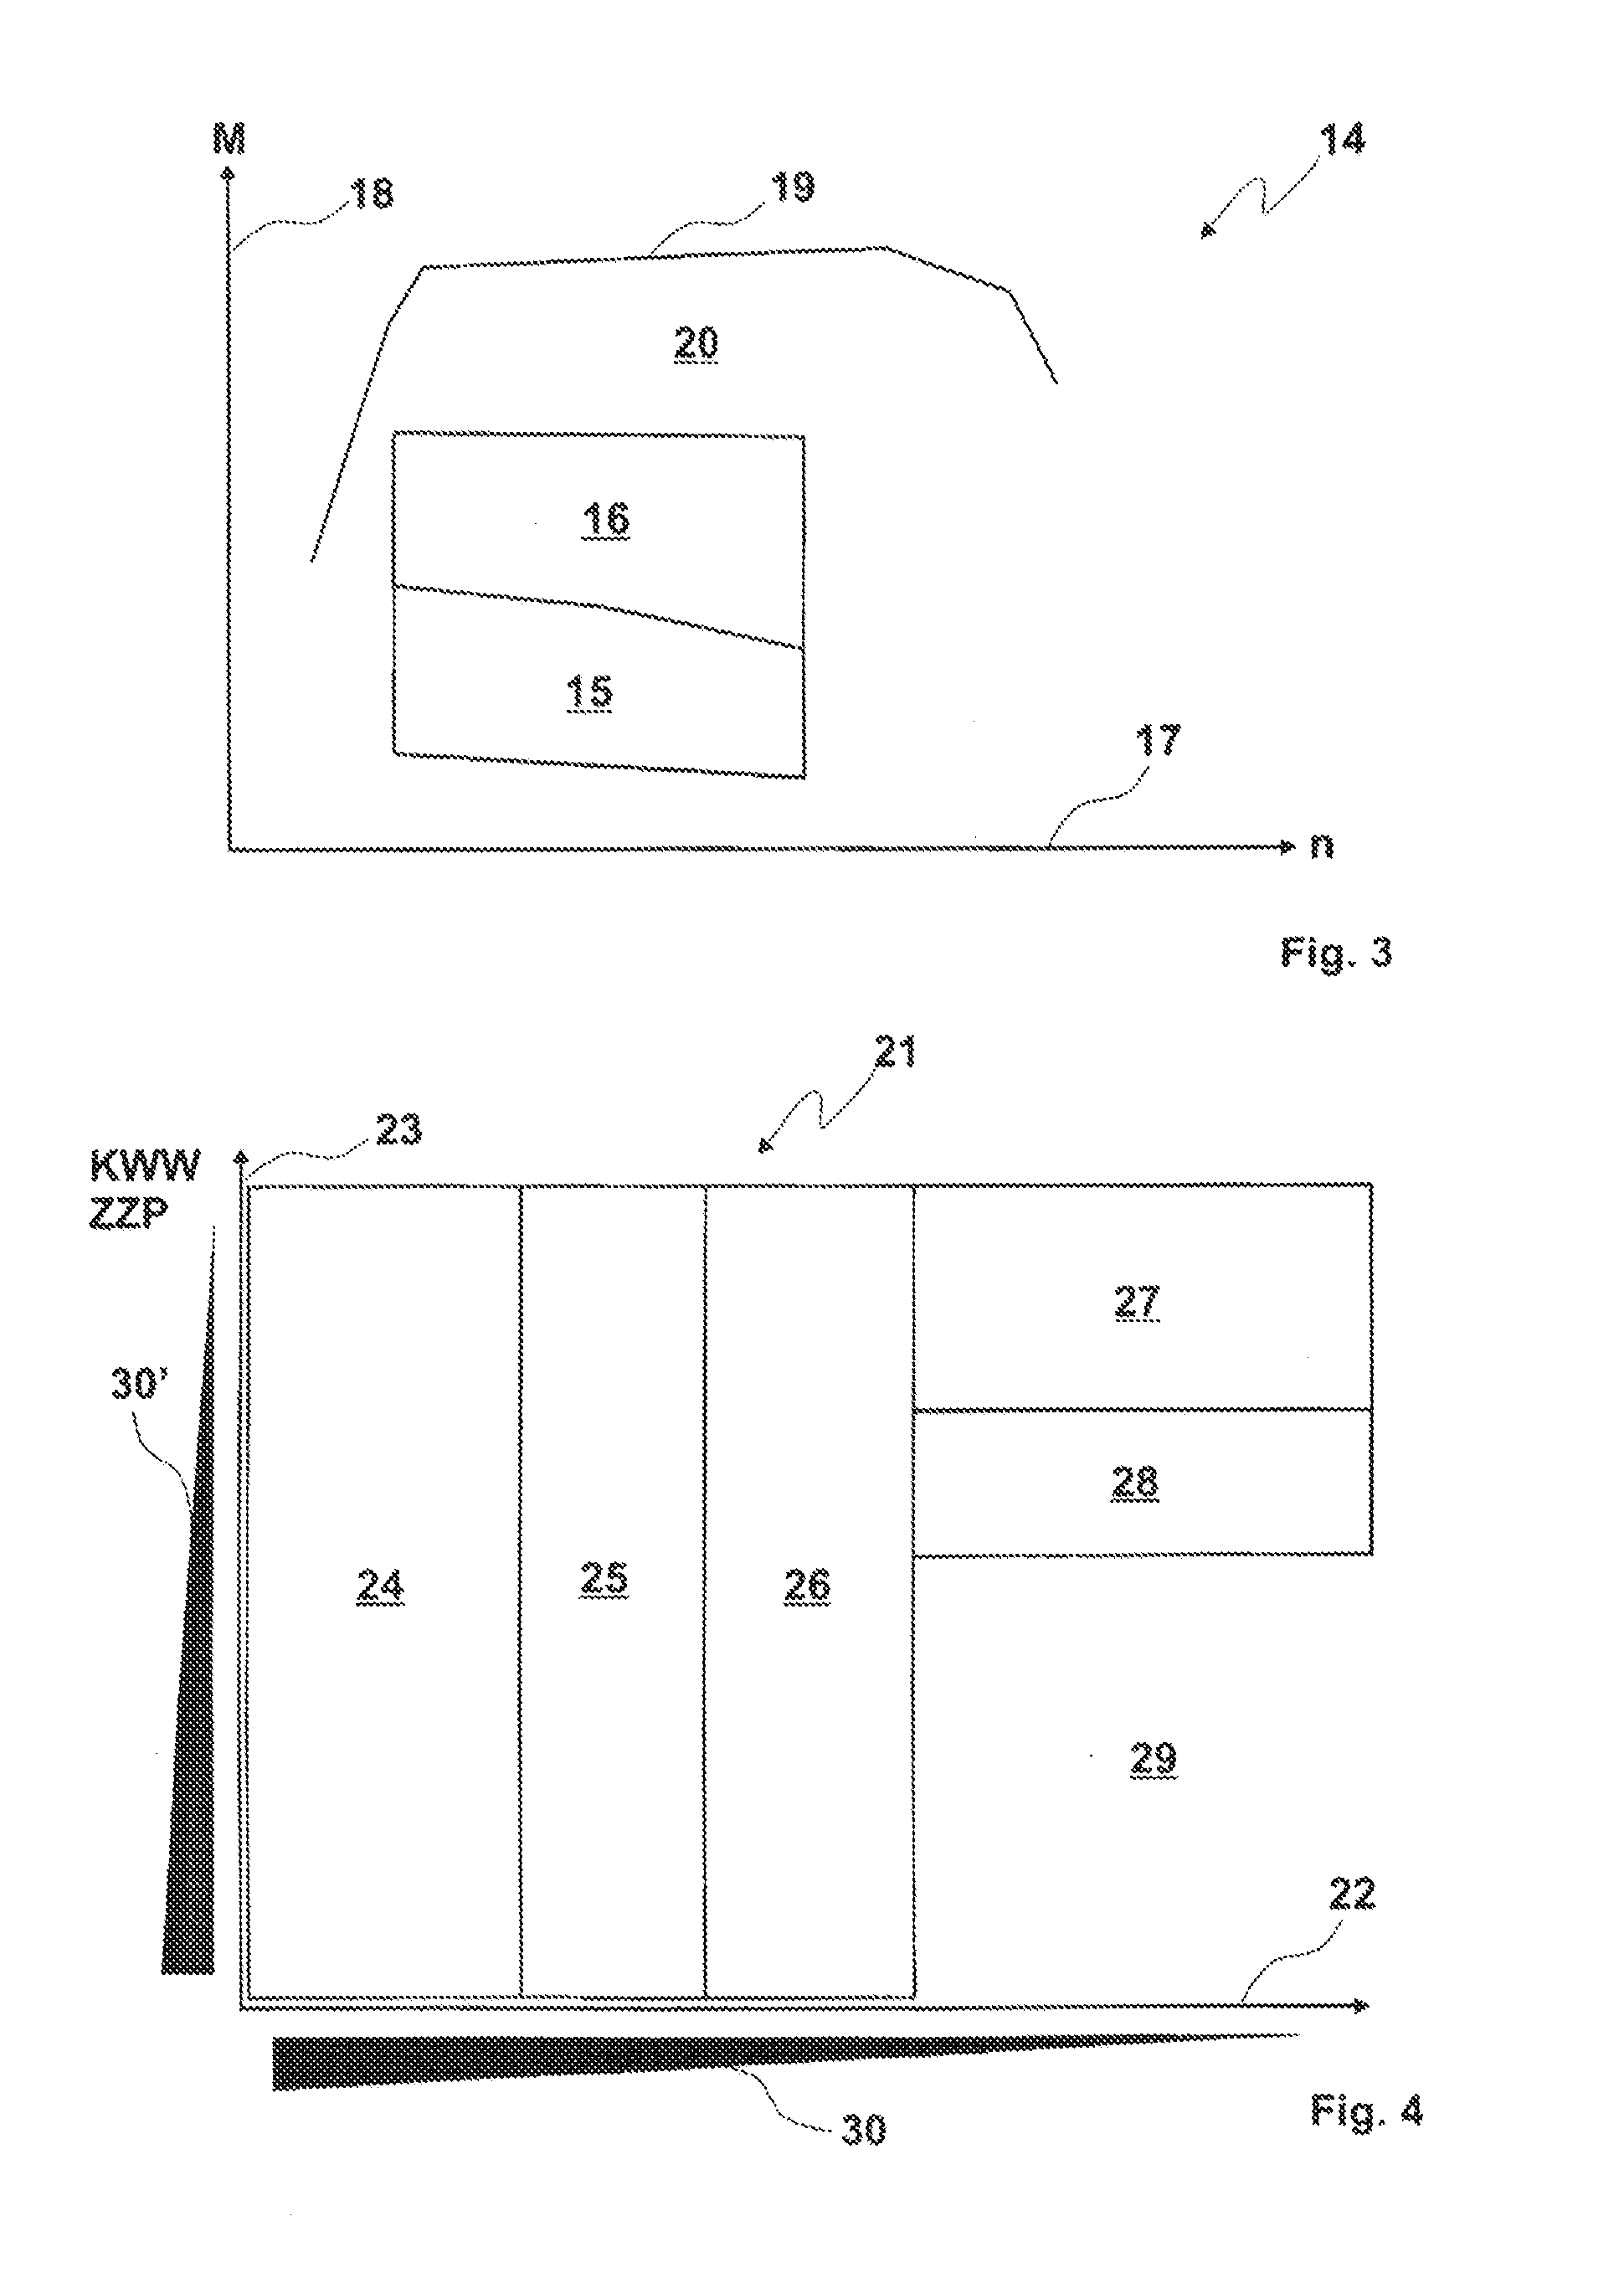 METHOD OF OPERATING AN INTERNAL COMBUSTION ENGINE WITH LOW NOx COMBUSTION